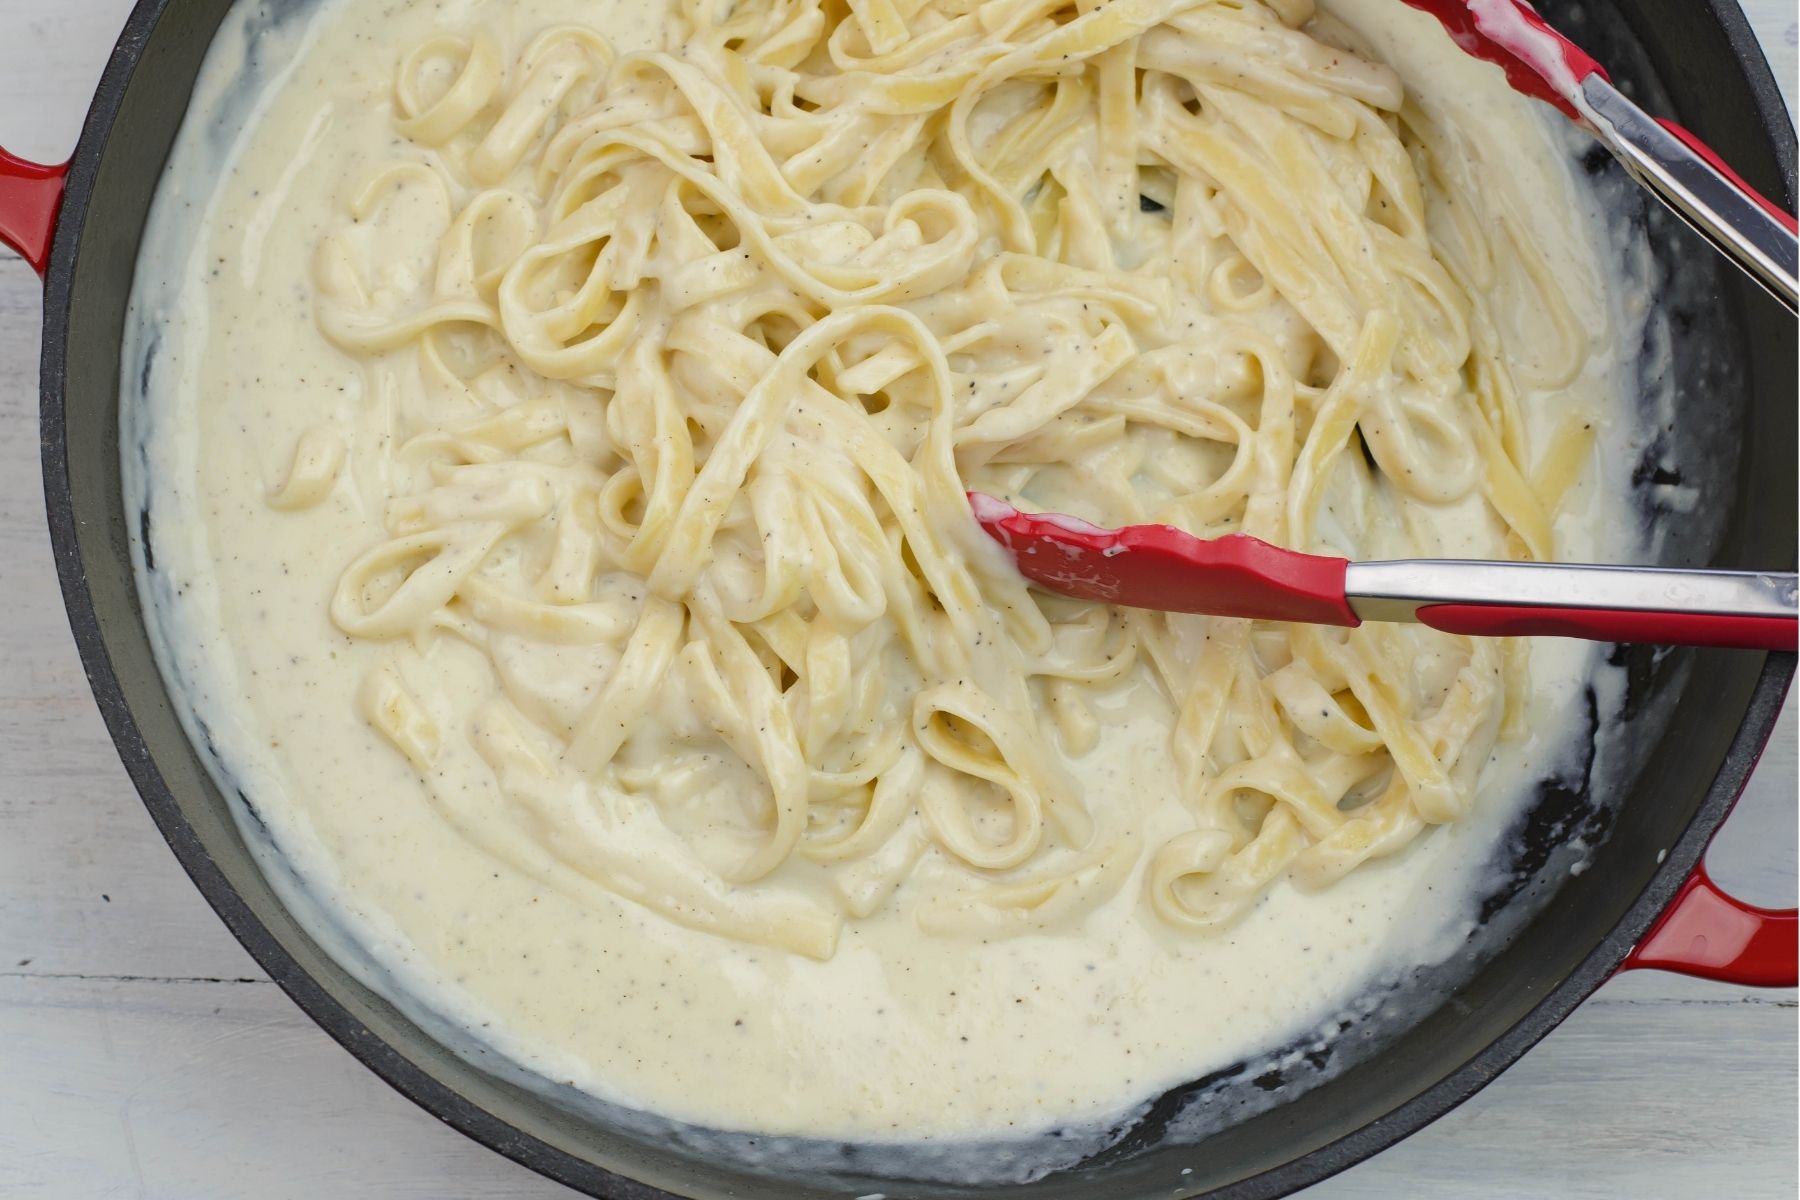 Tossing cooked pasta with alfredo sauce in a red skillet.